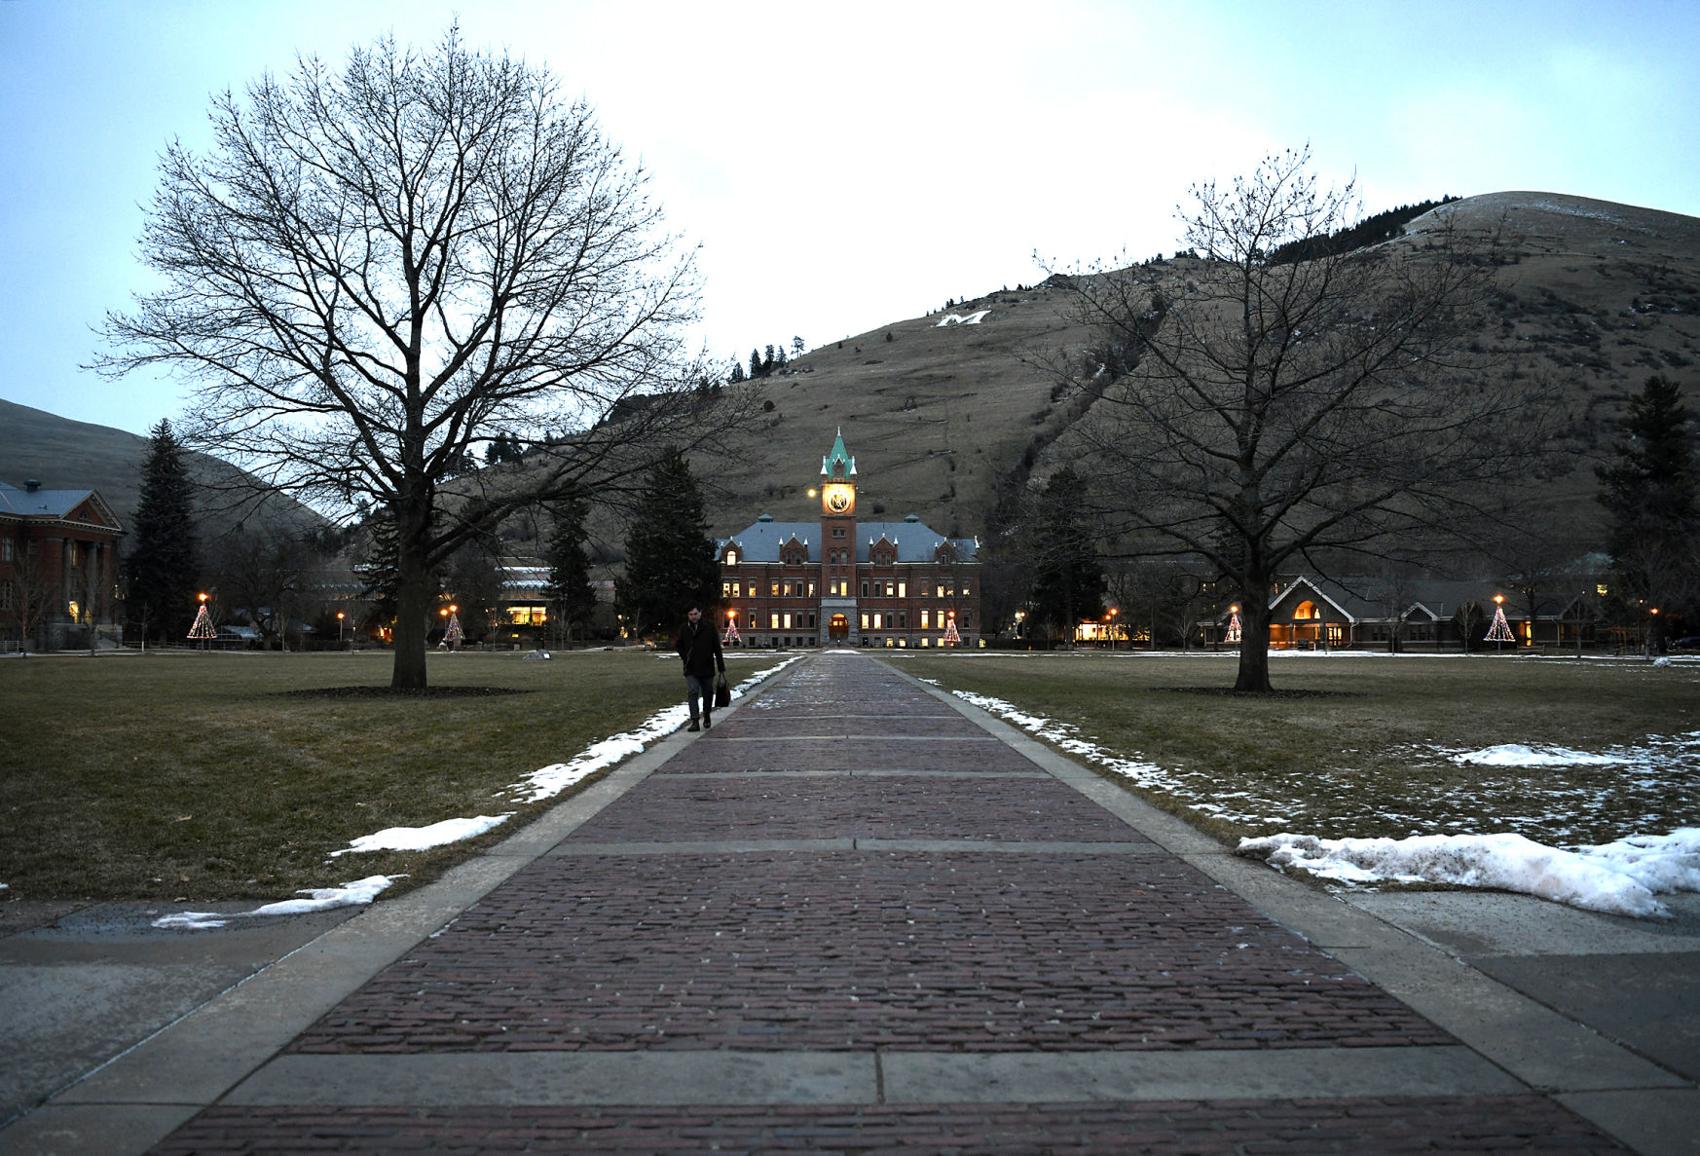 Anti-Semitic-emails-sent-to-nearly-400-University-of-Montana-faculty-staff.jpg